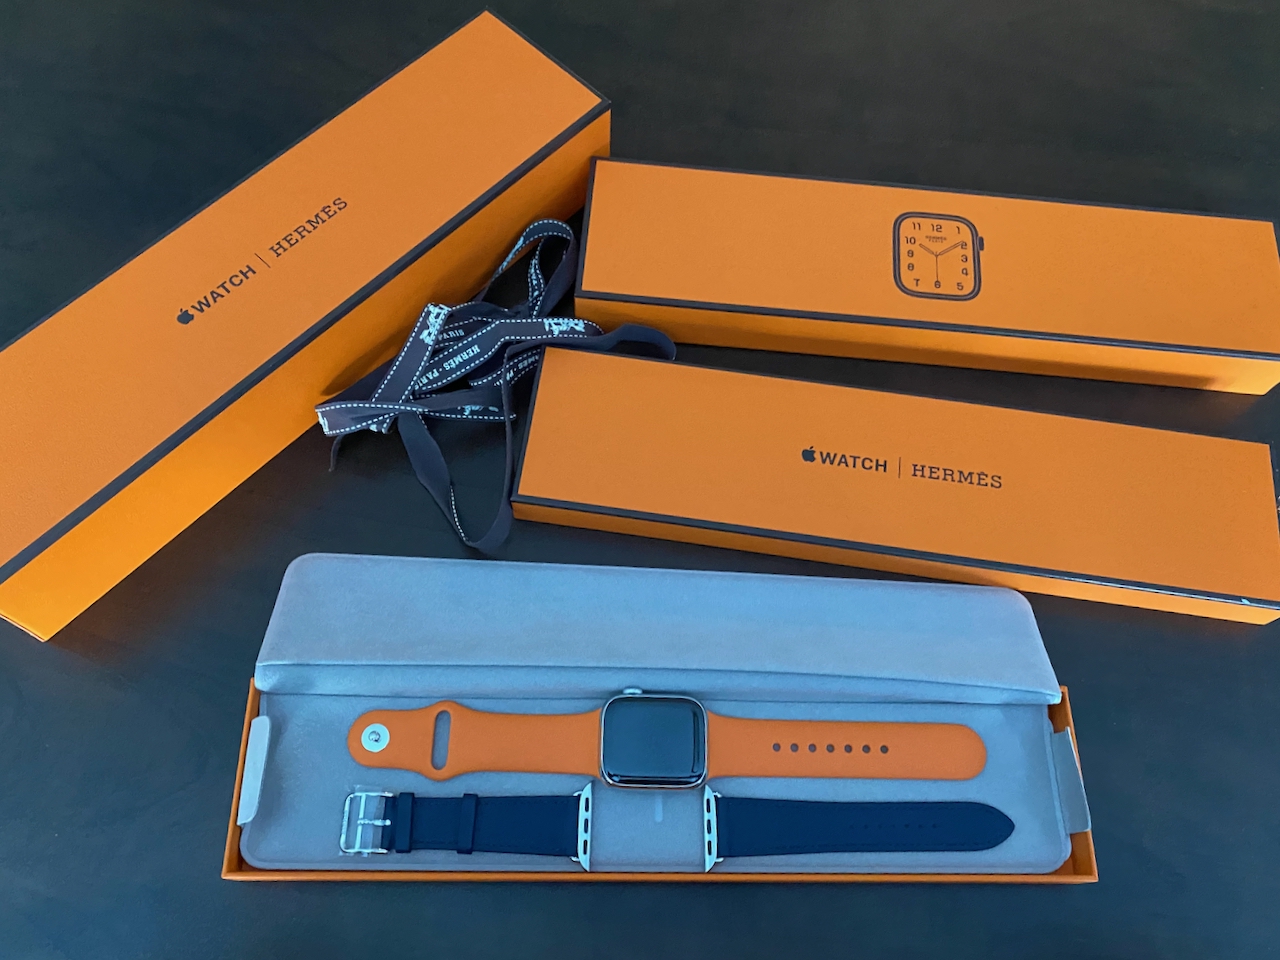 The Apple Watch Hermès comes with the Hermès-only orange sports strap, and then you also select a leather band. Photo via @The_Notorious_Pink